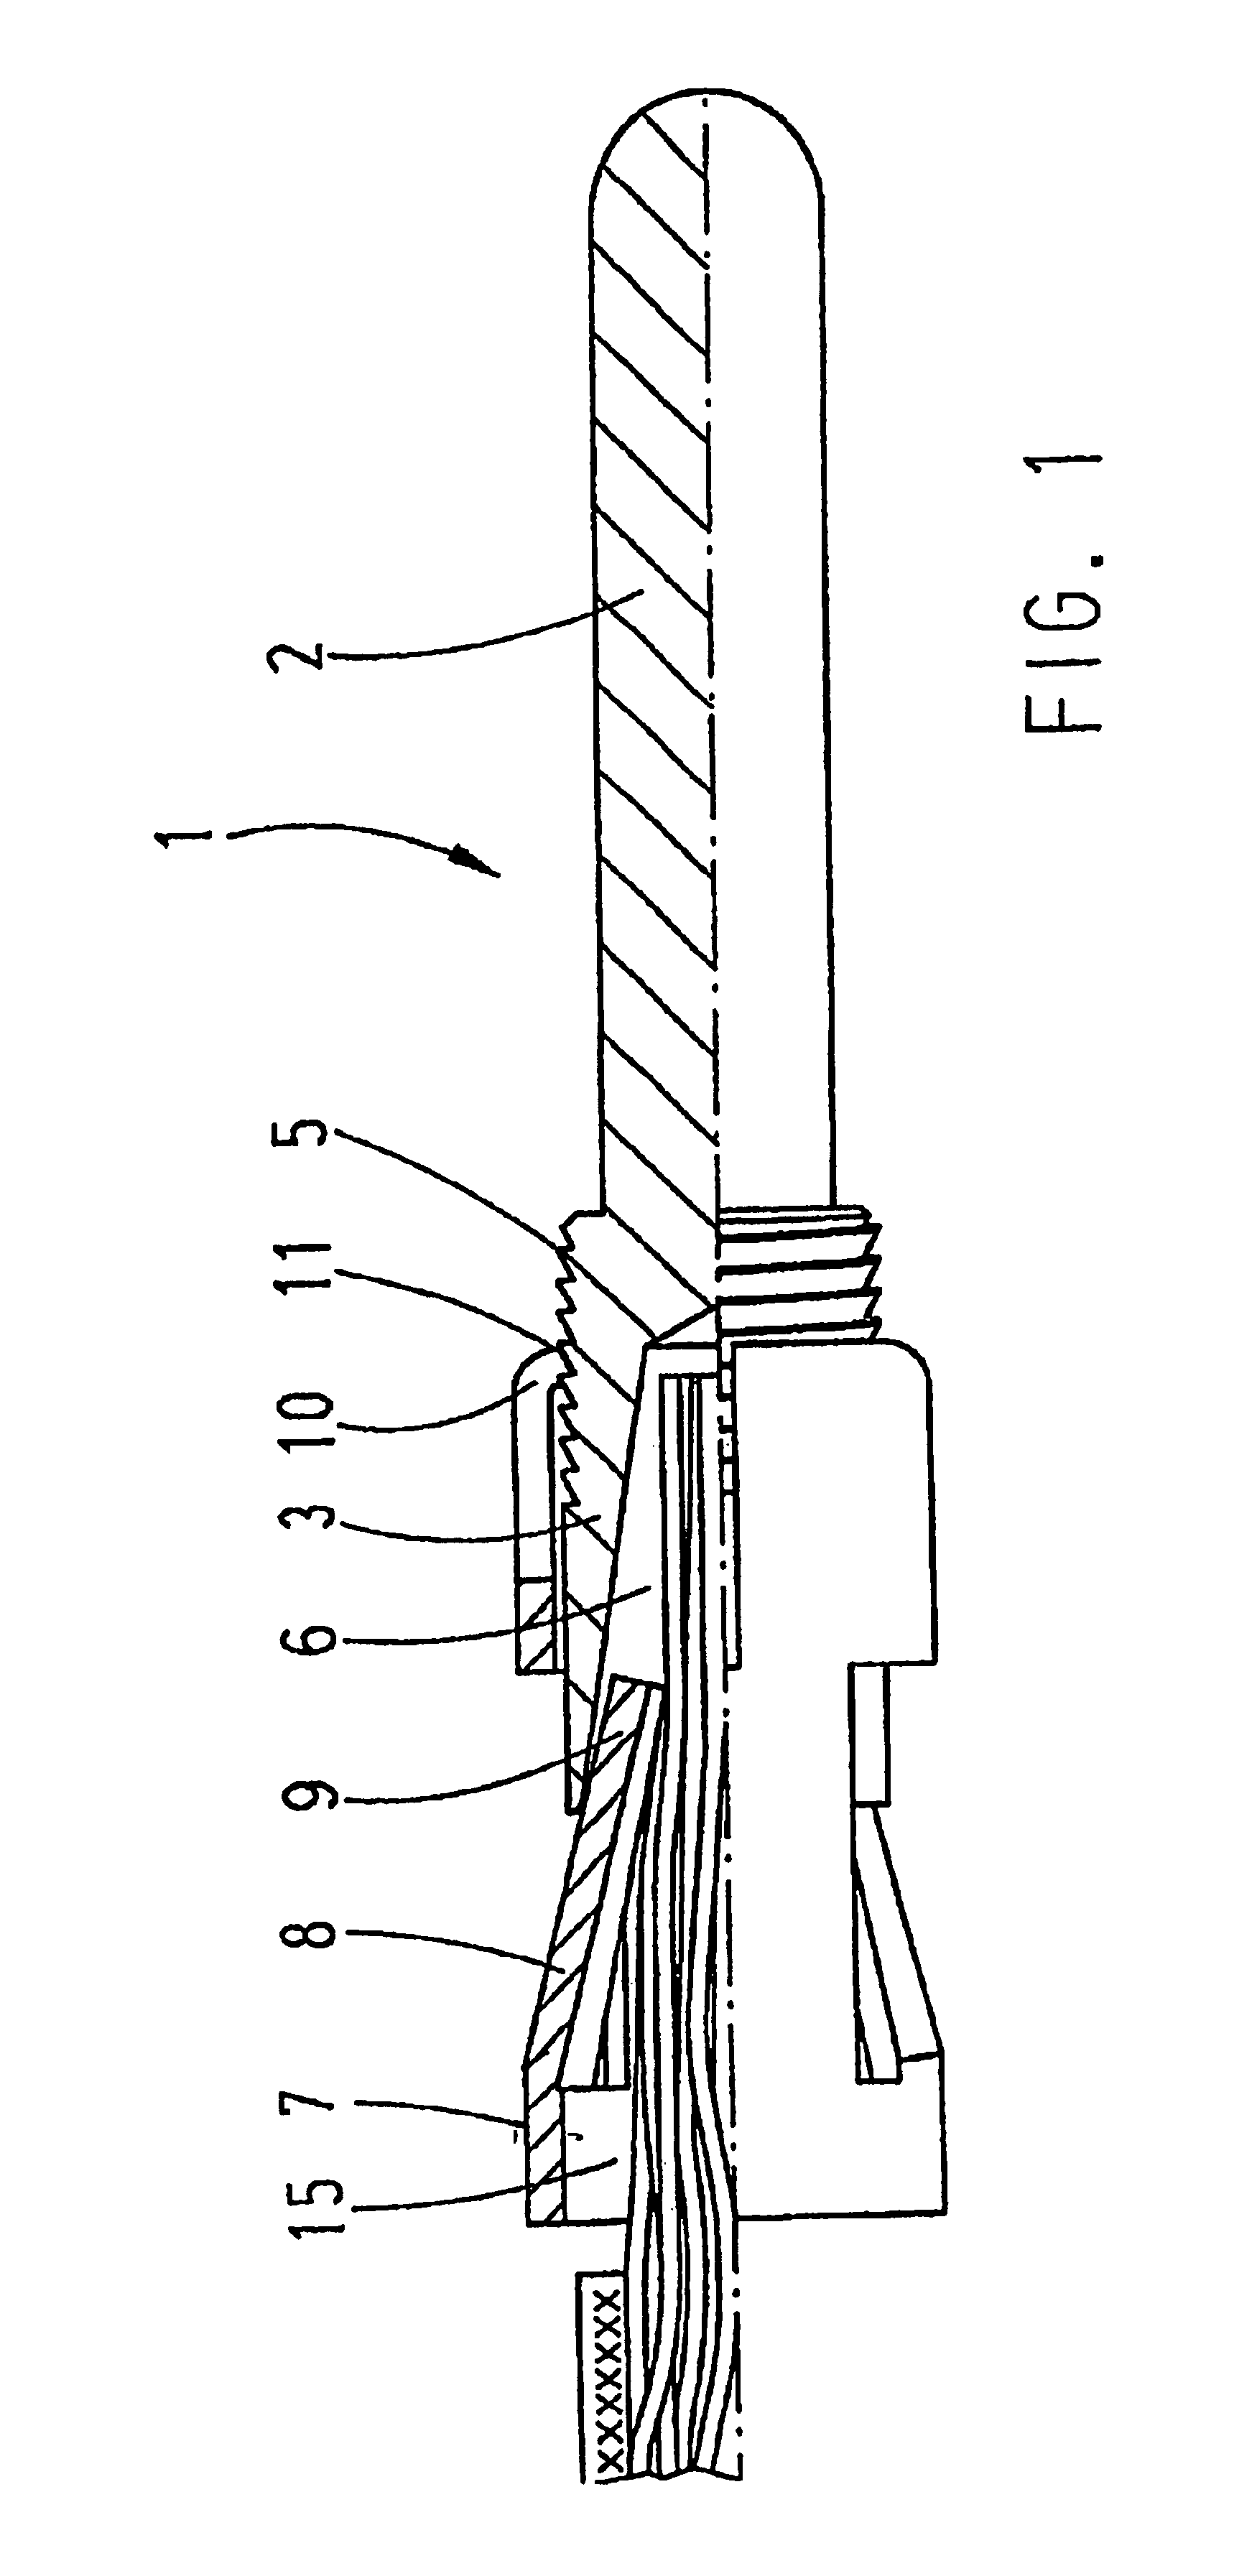 Electrical contact element, in particular a contact element formed as pin contact or socket contact